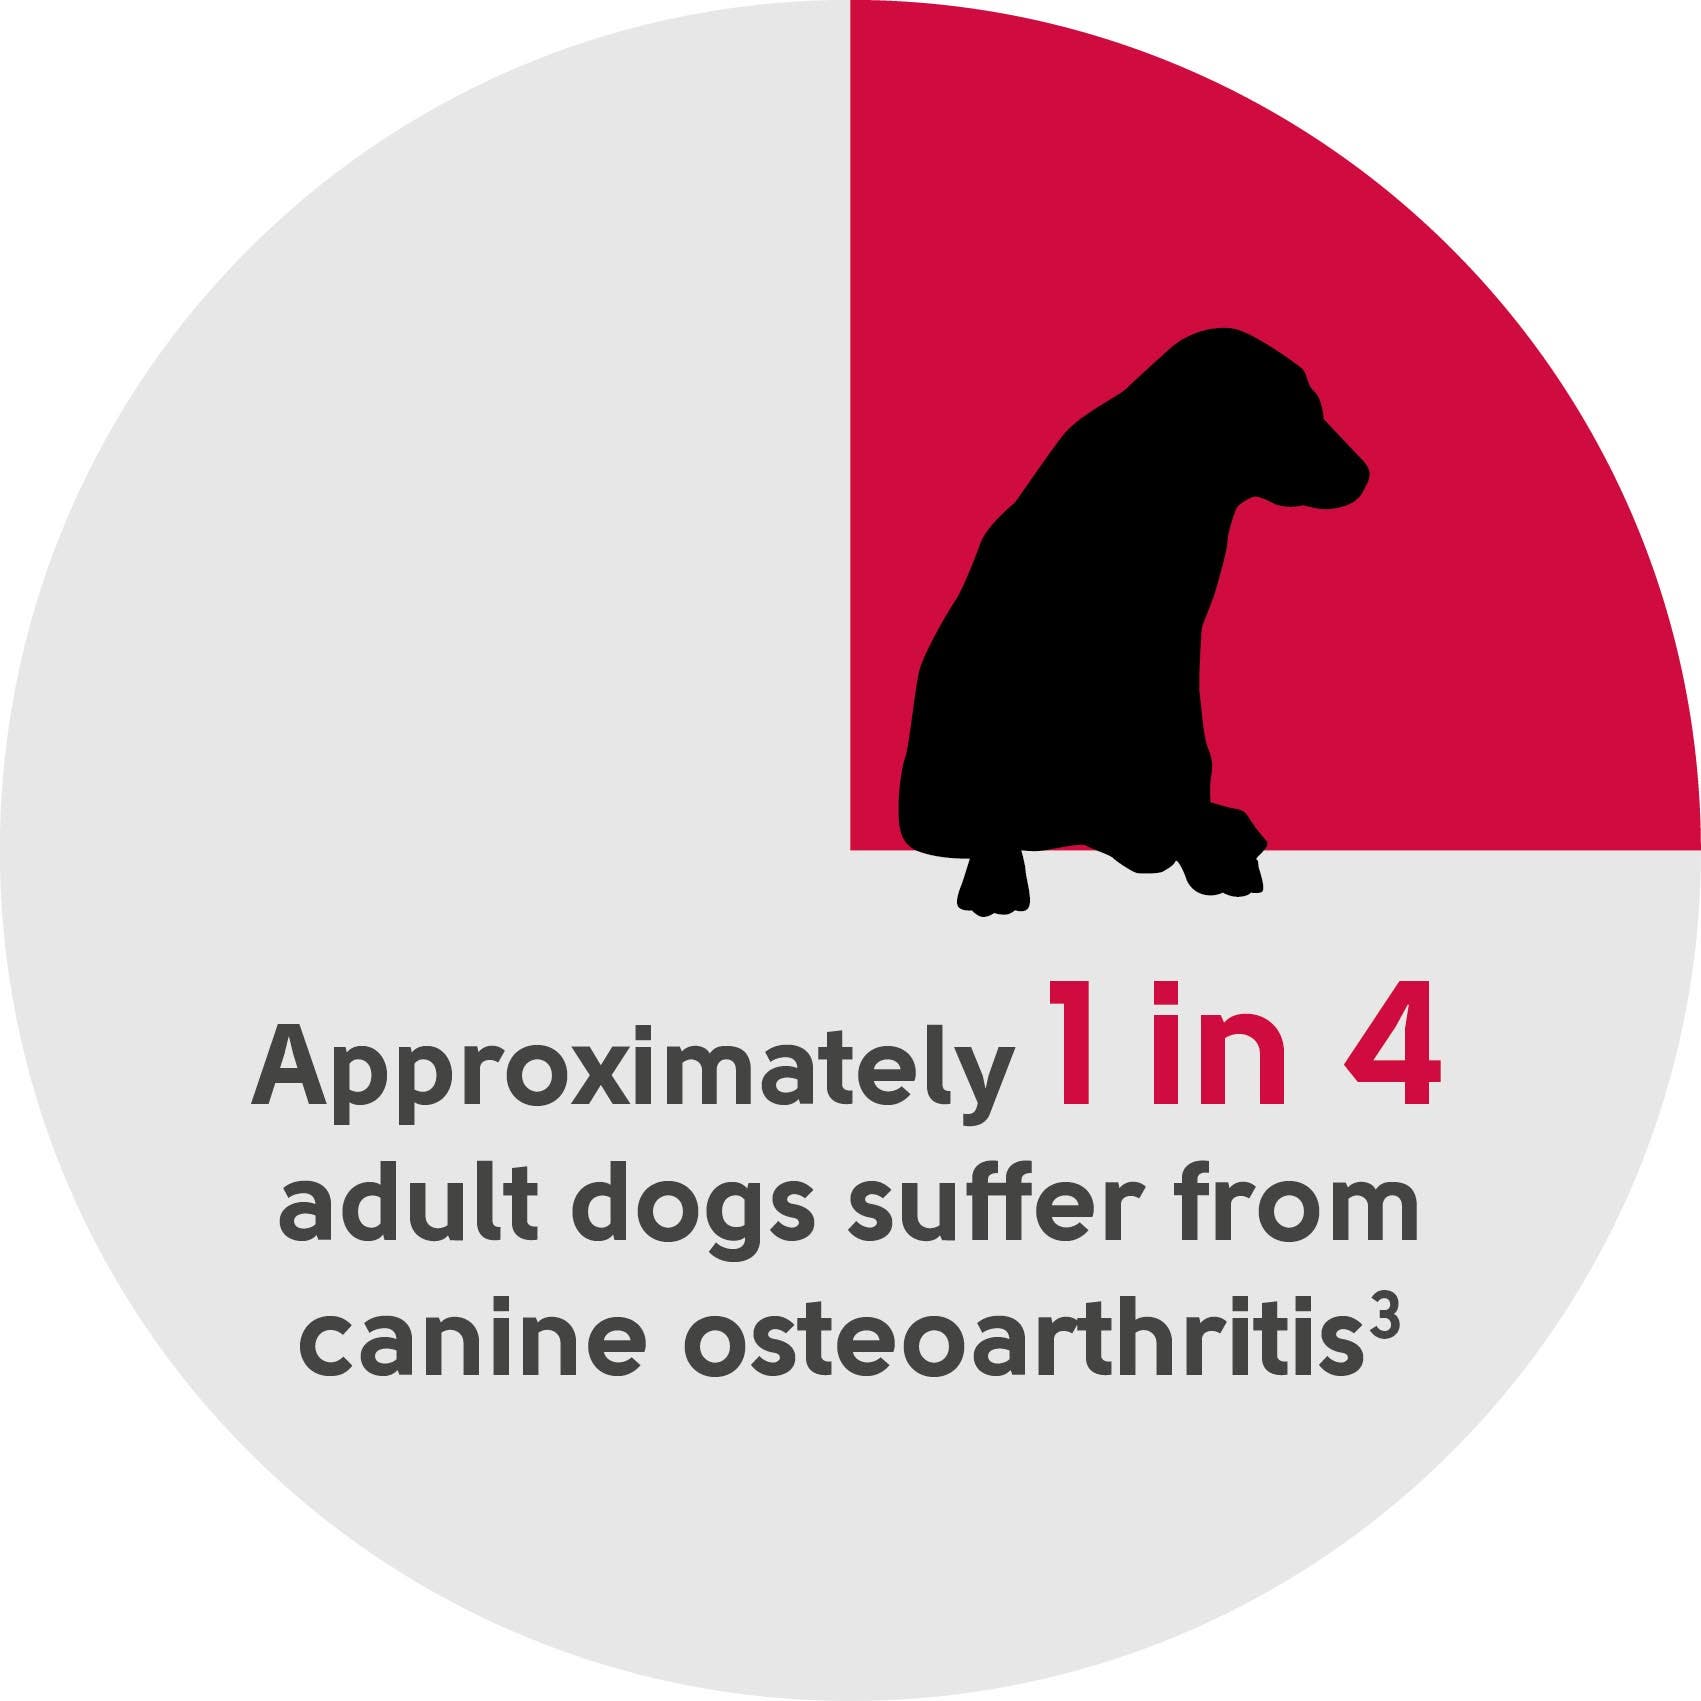 Approximately 1 in 4 dogs suffer from canine osteoarthritis